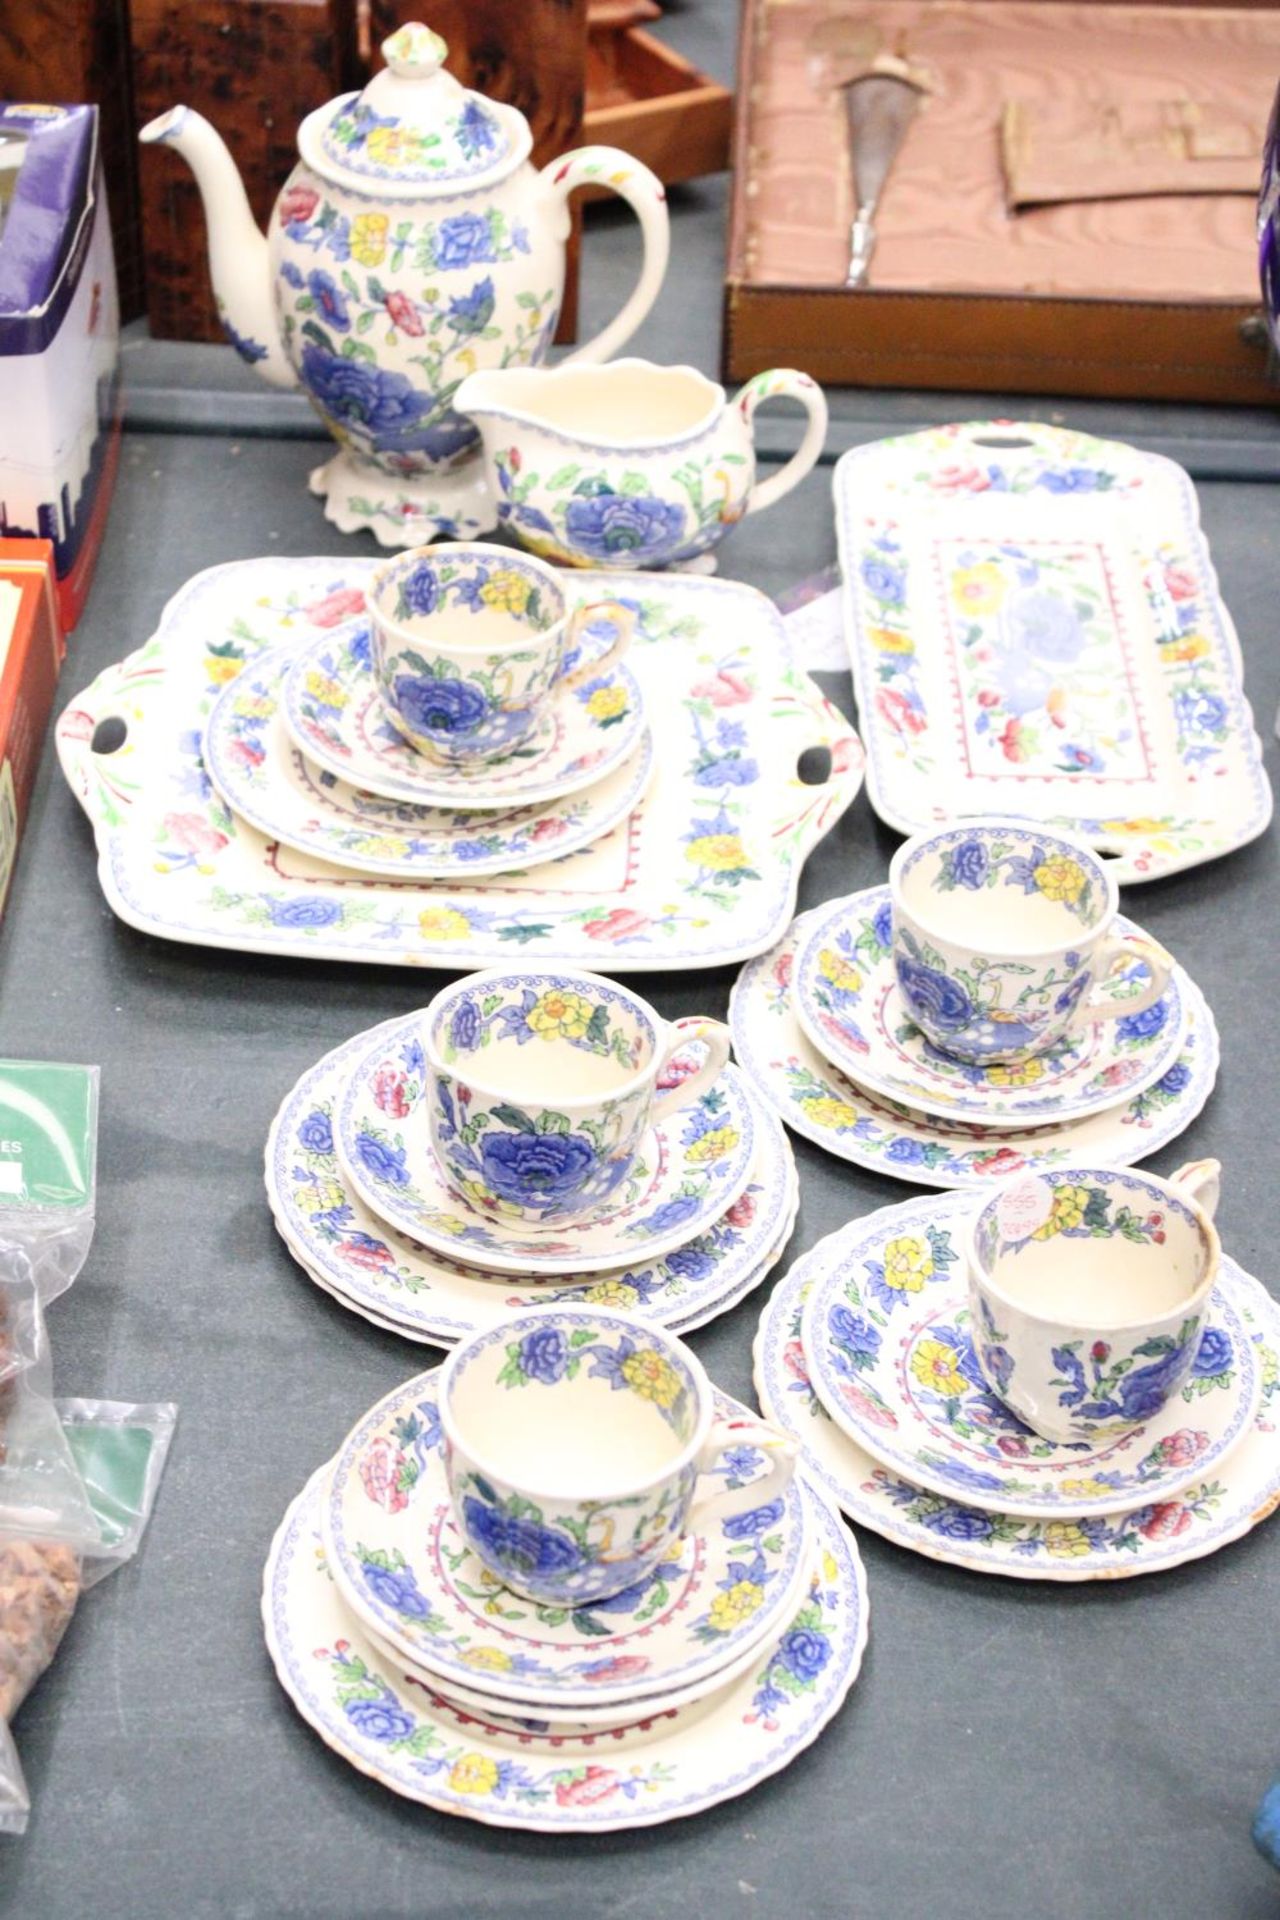 A QUANTITY OF MASONS "REGENCY" WARE TO INCLUDE A TEAPOT, CUPS, SAUCERS, PLATES ETC